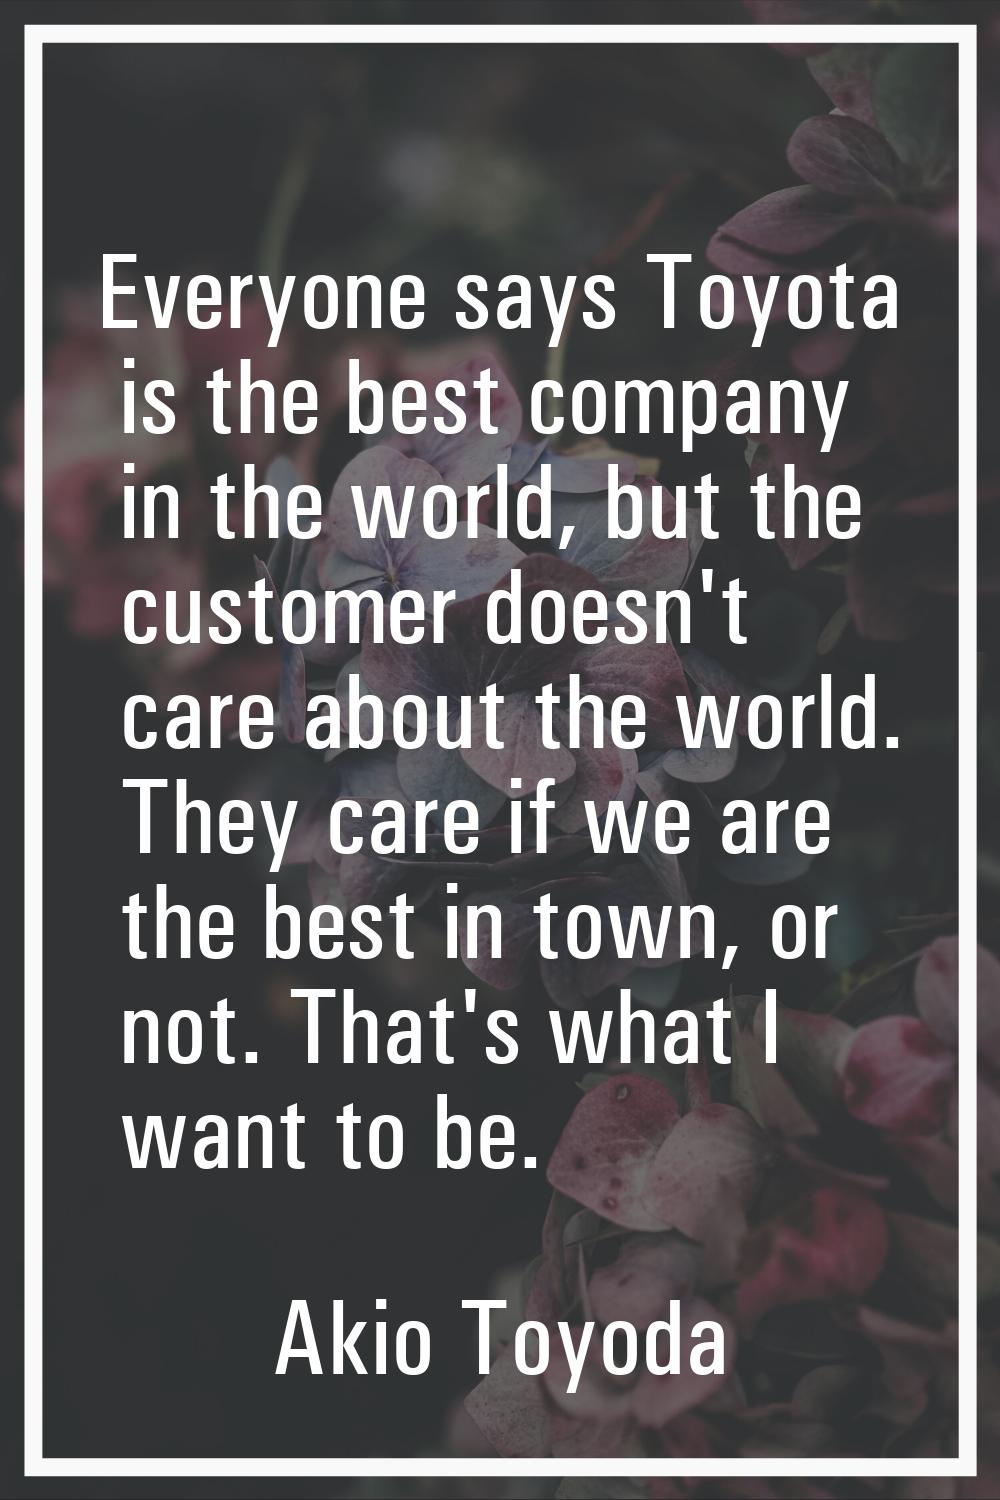 Everyone says Toyota is the best company in the world, but the customer doesn't care about the worl